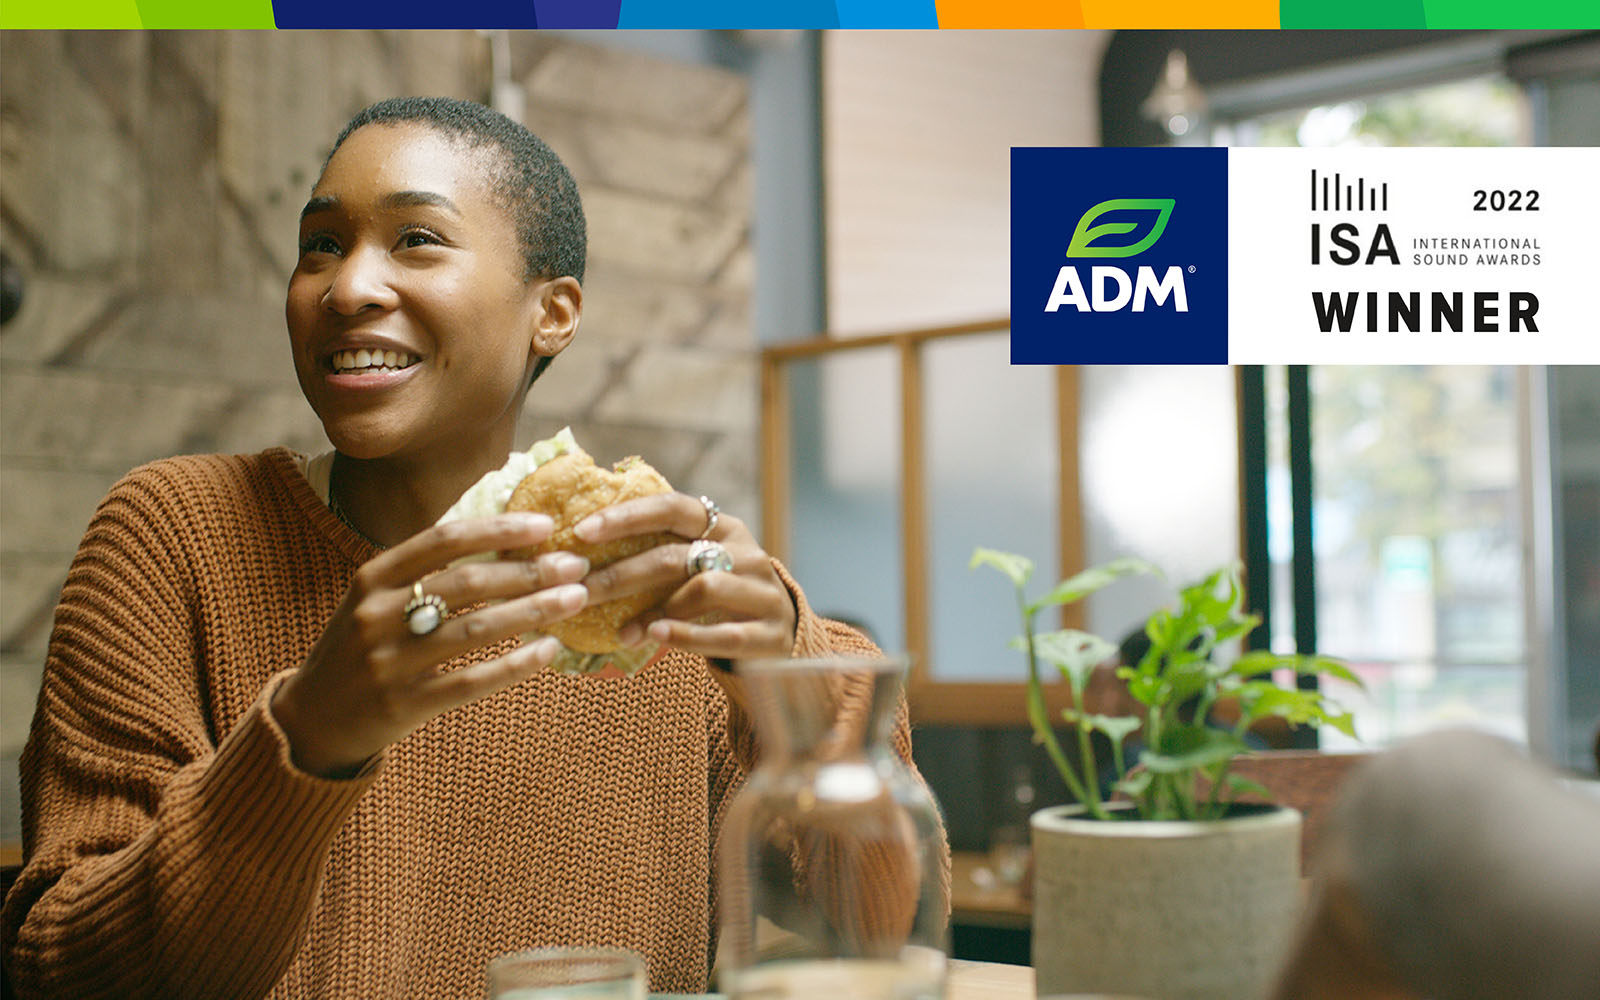 Out to Unlock Nature’s Power, ADM Wins International Award for Audio Branding